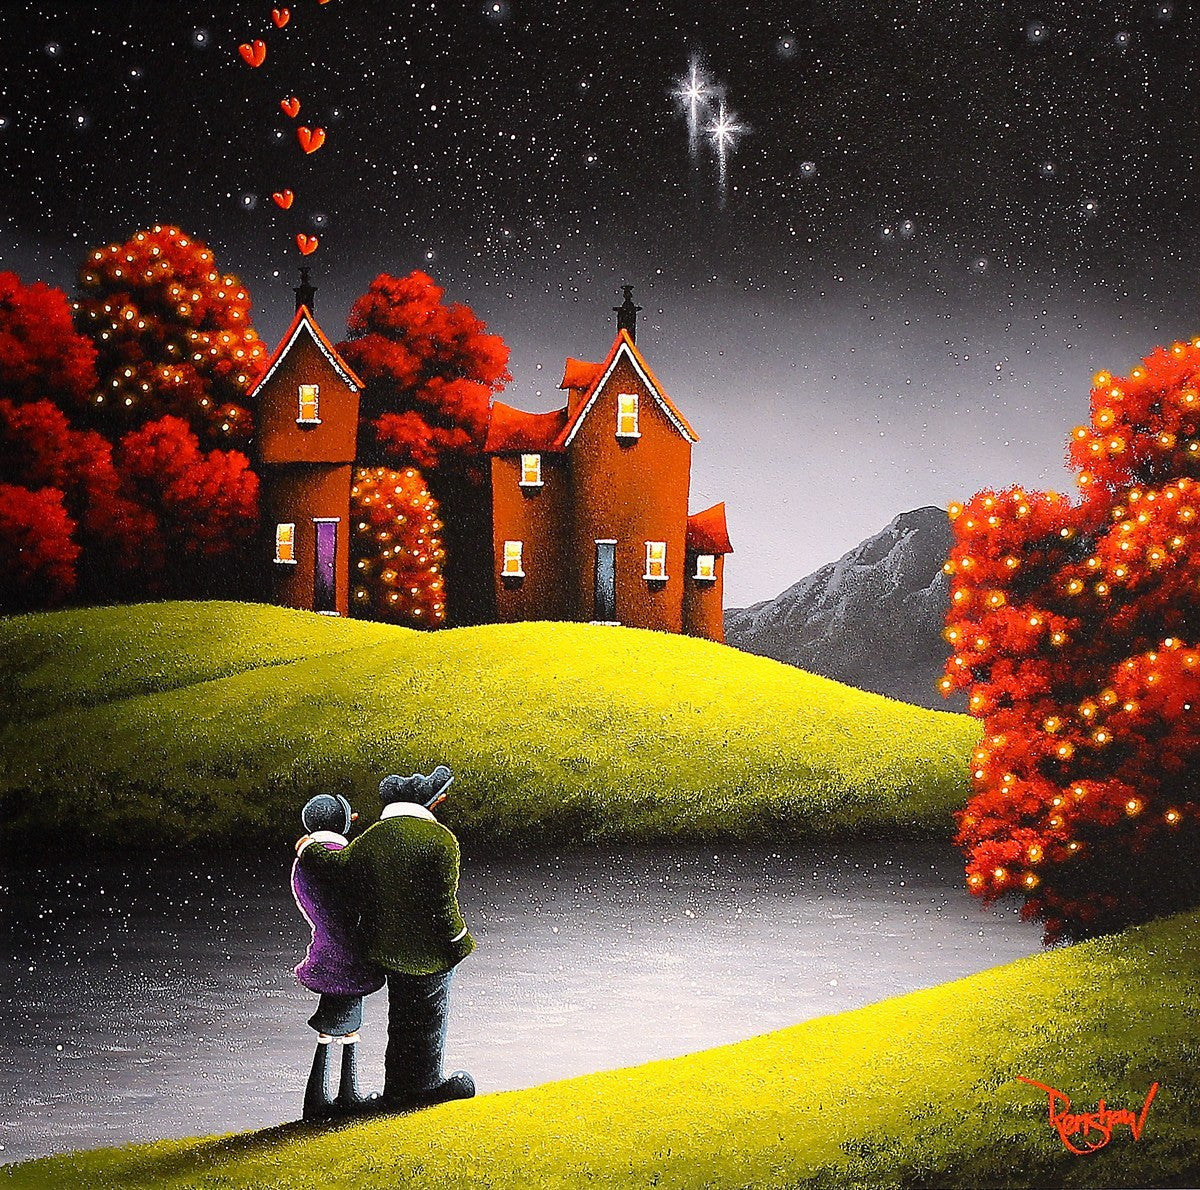 Reach For The Stars - SOLD David Renshaw